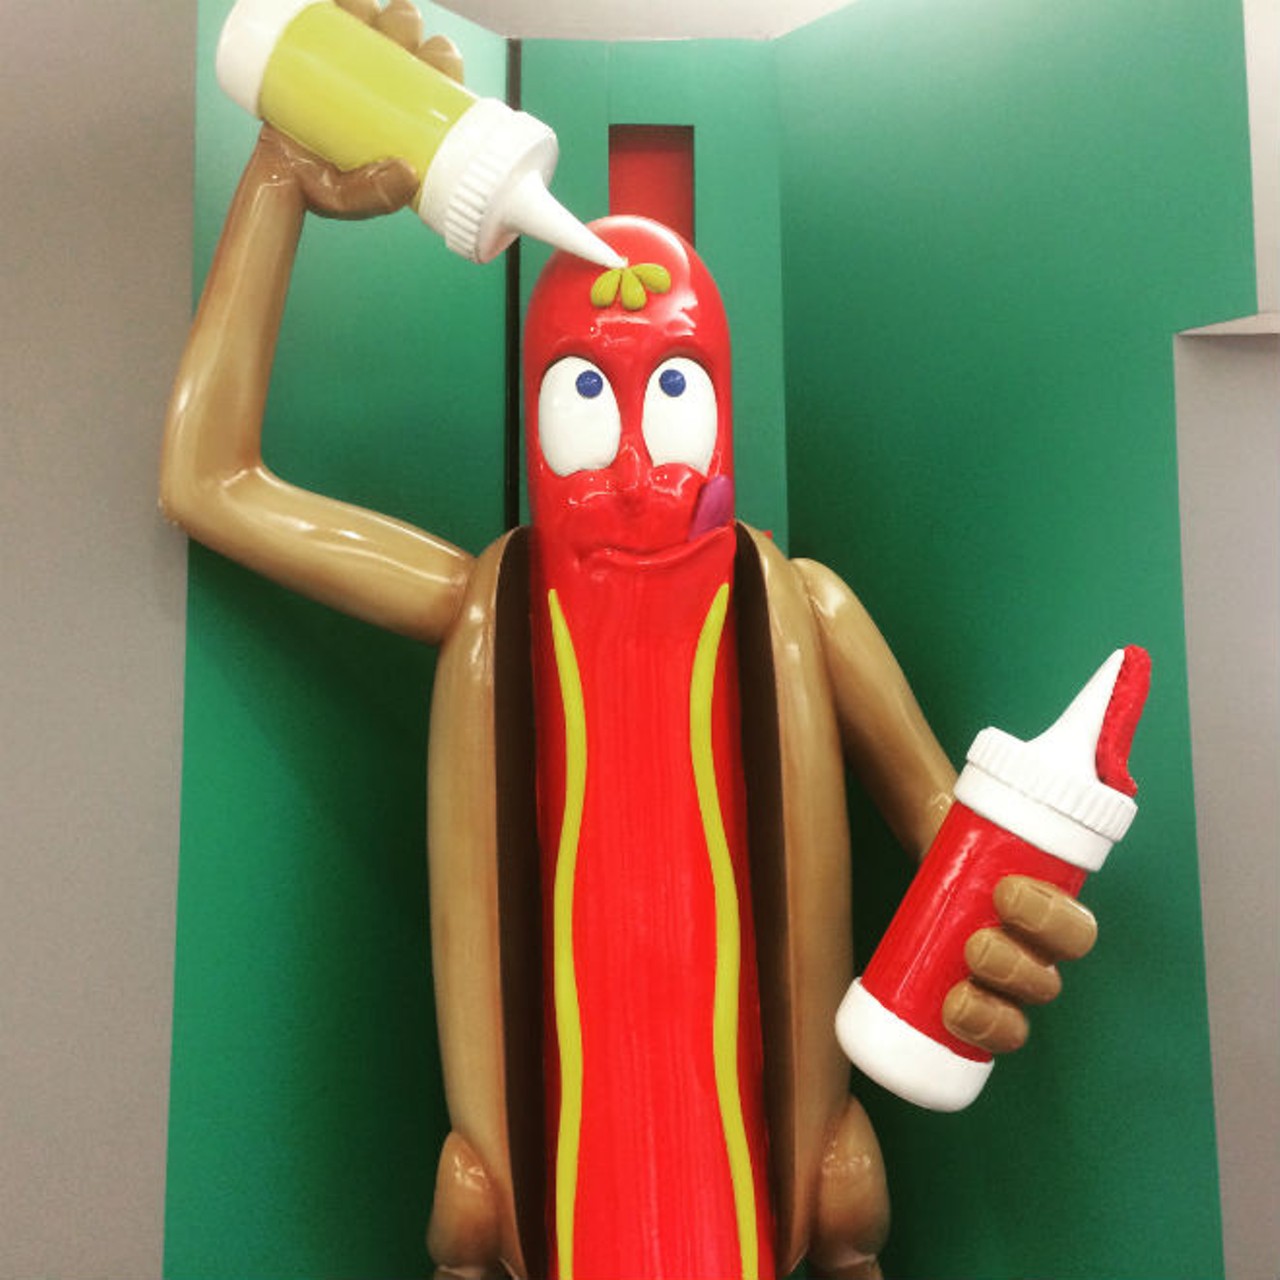 This hot dog at Fashion Square mall is prepping itself to be eaten. Dark.